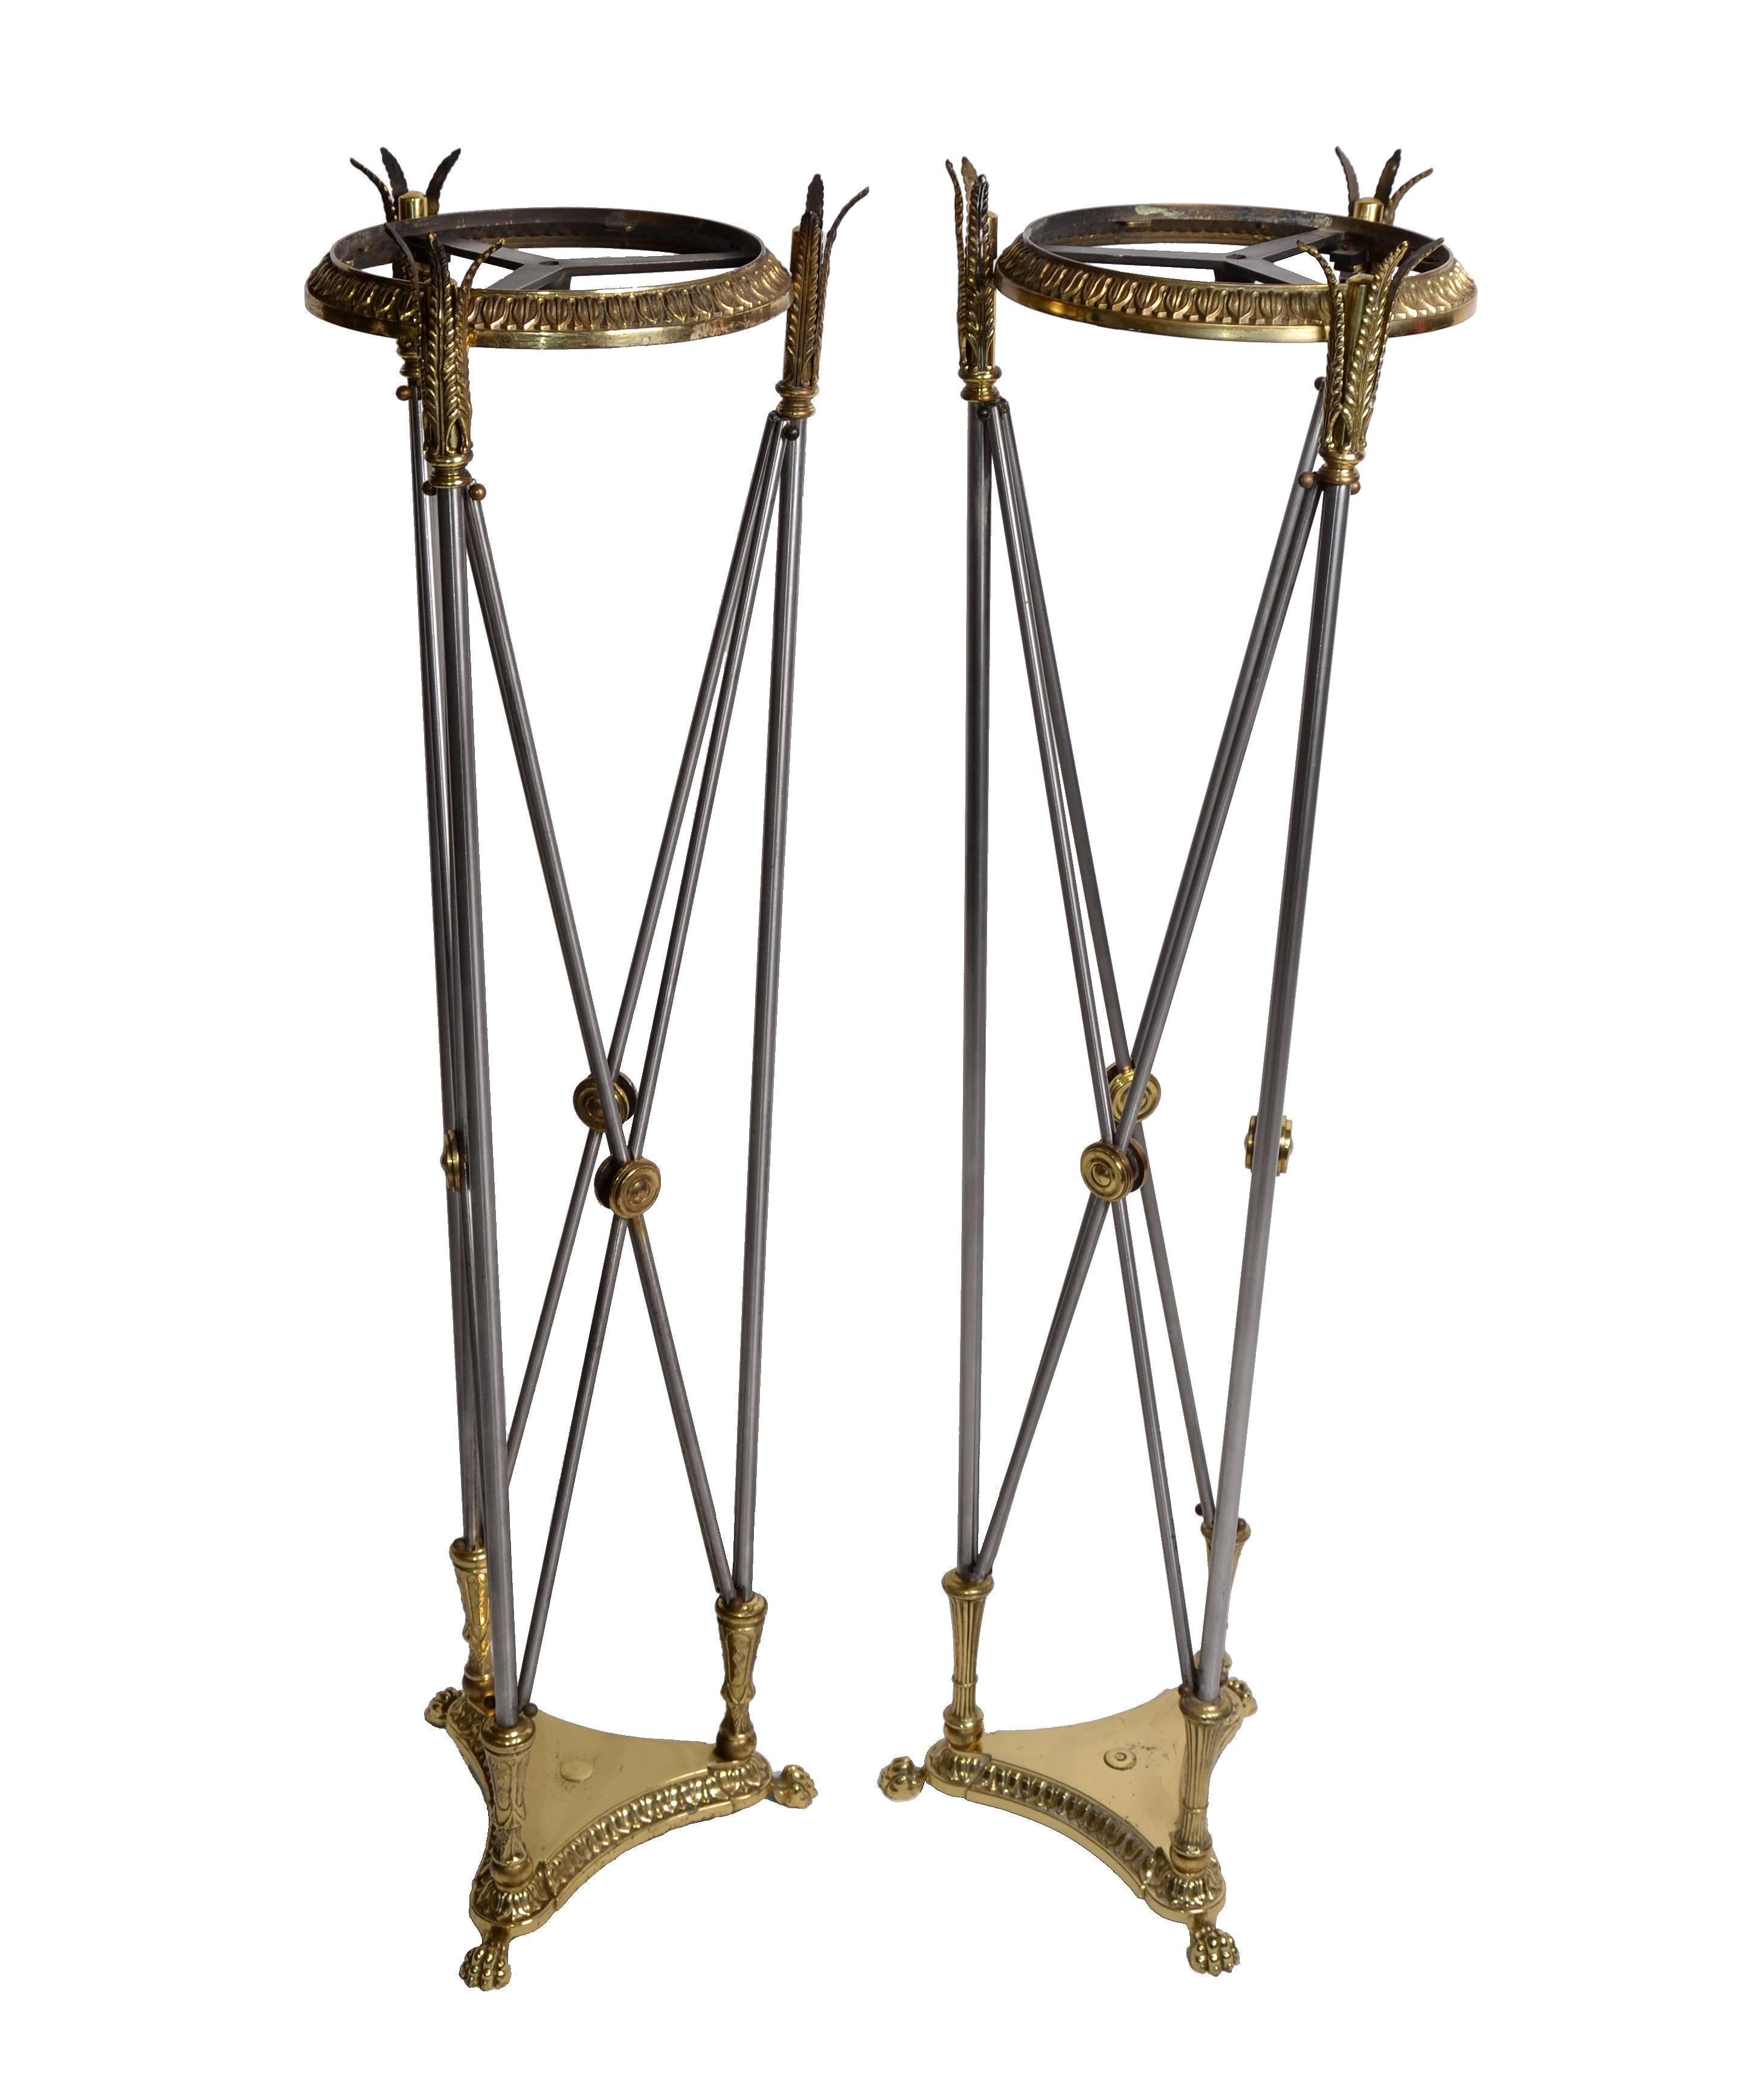 Hollywood Regency Maison Jansen Style planter stand/pedestal, a pair.
Beautifully crafted with brass and steel.
Very detailed bases with claw feet.
   